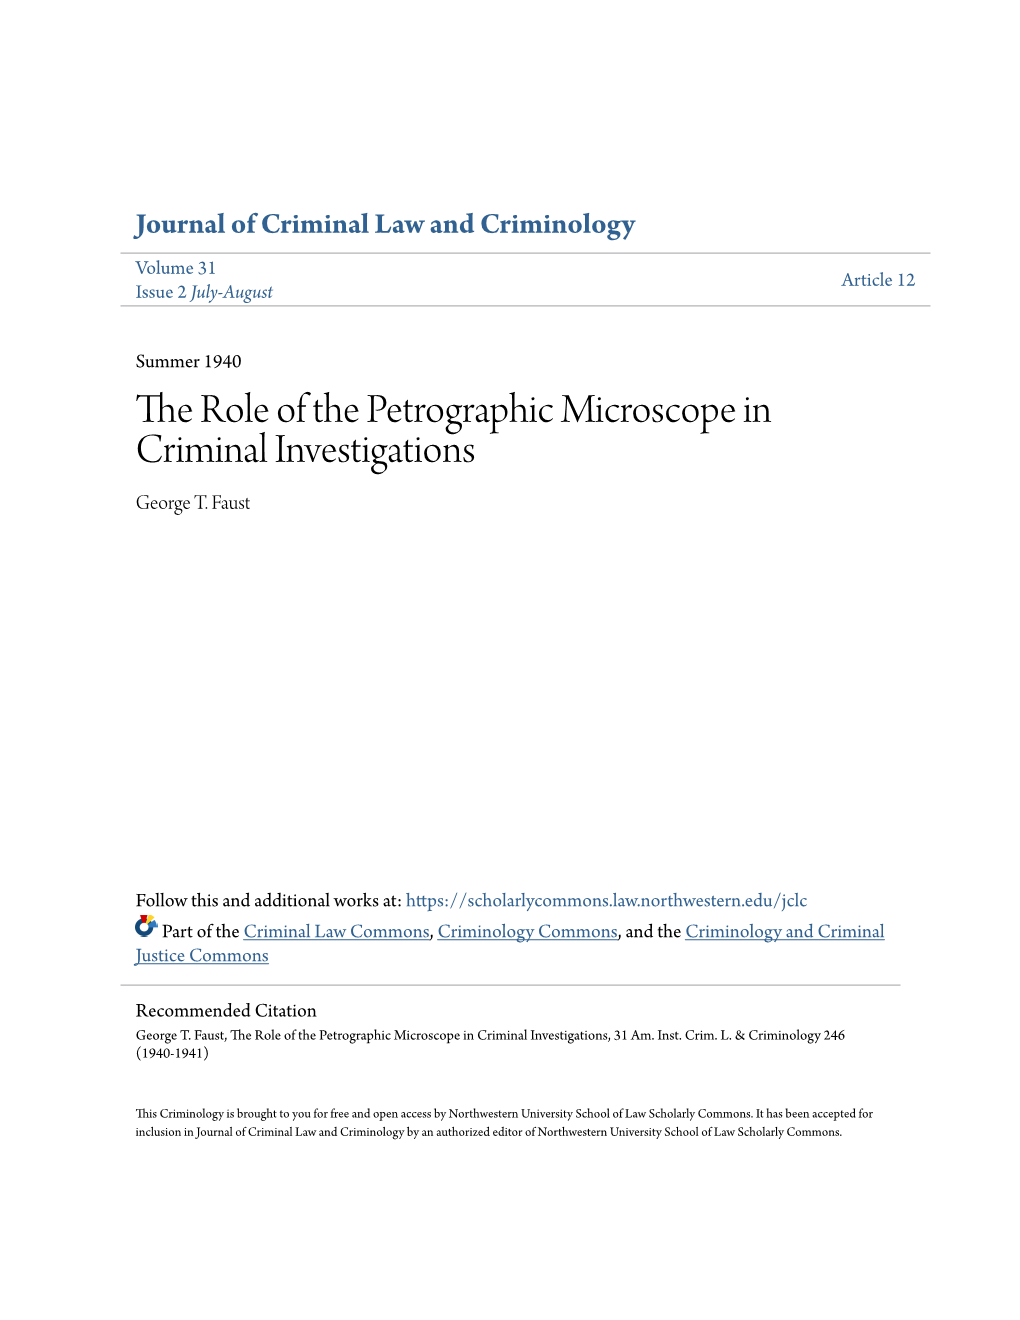 The Role of the Petrographic Microscope in Criminal Investigations George T